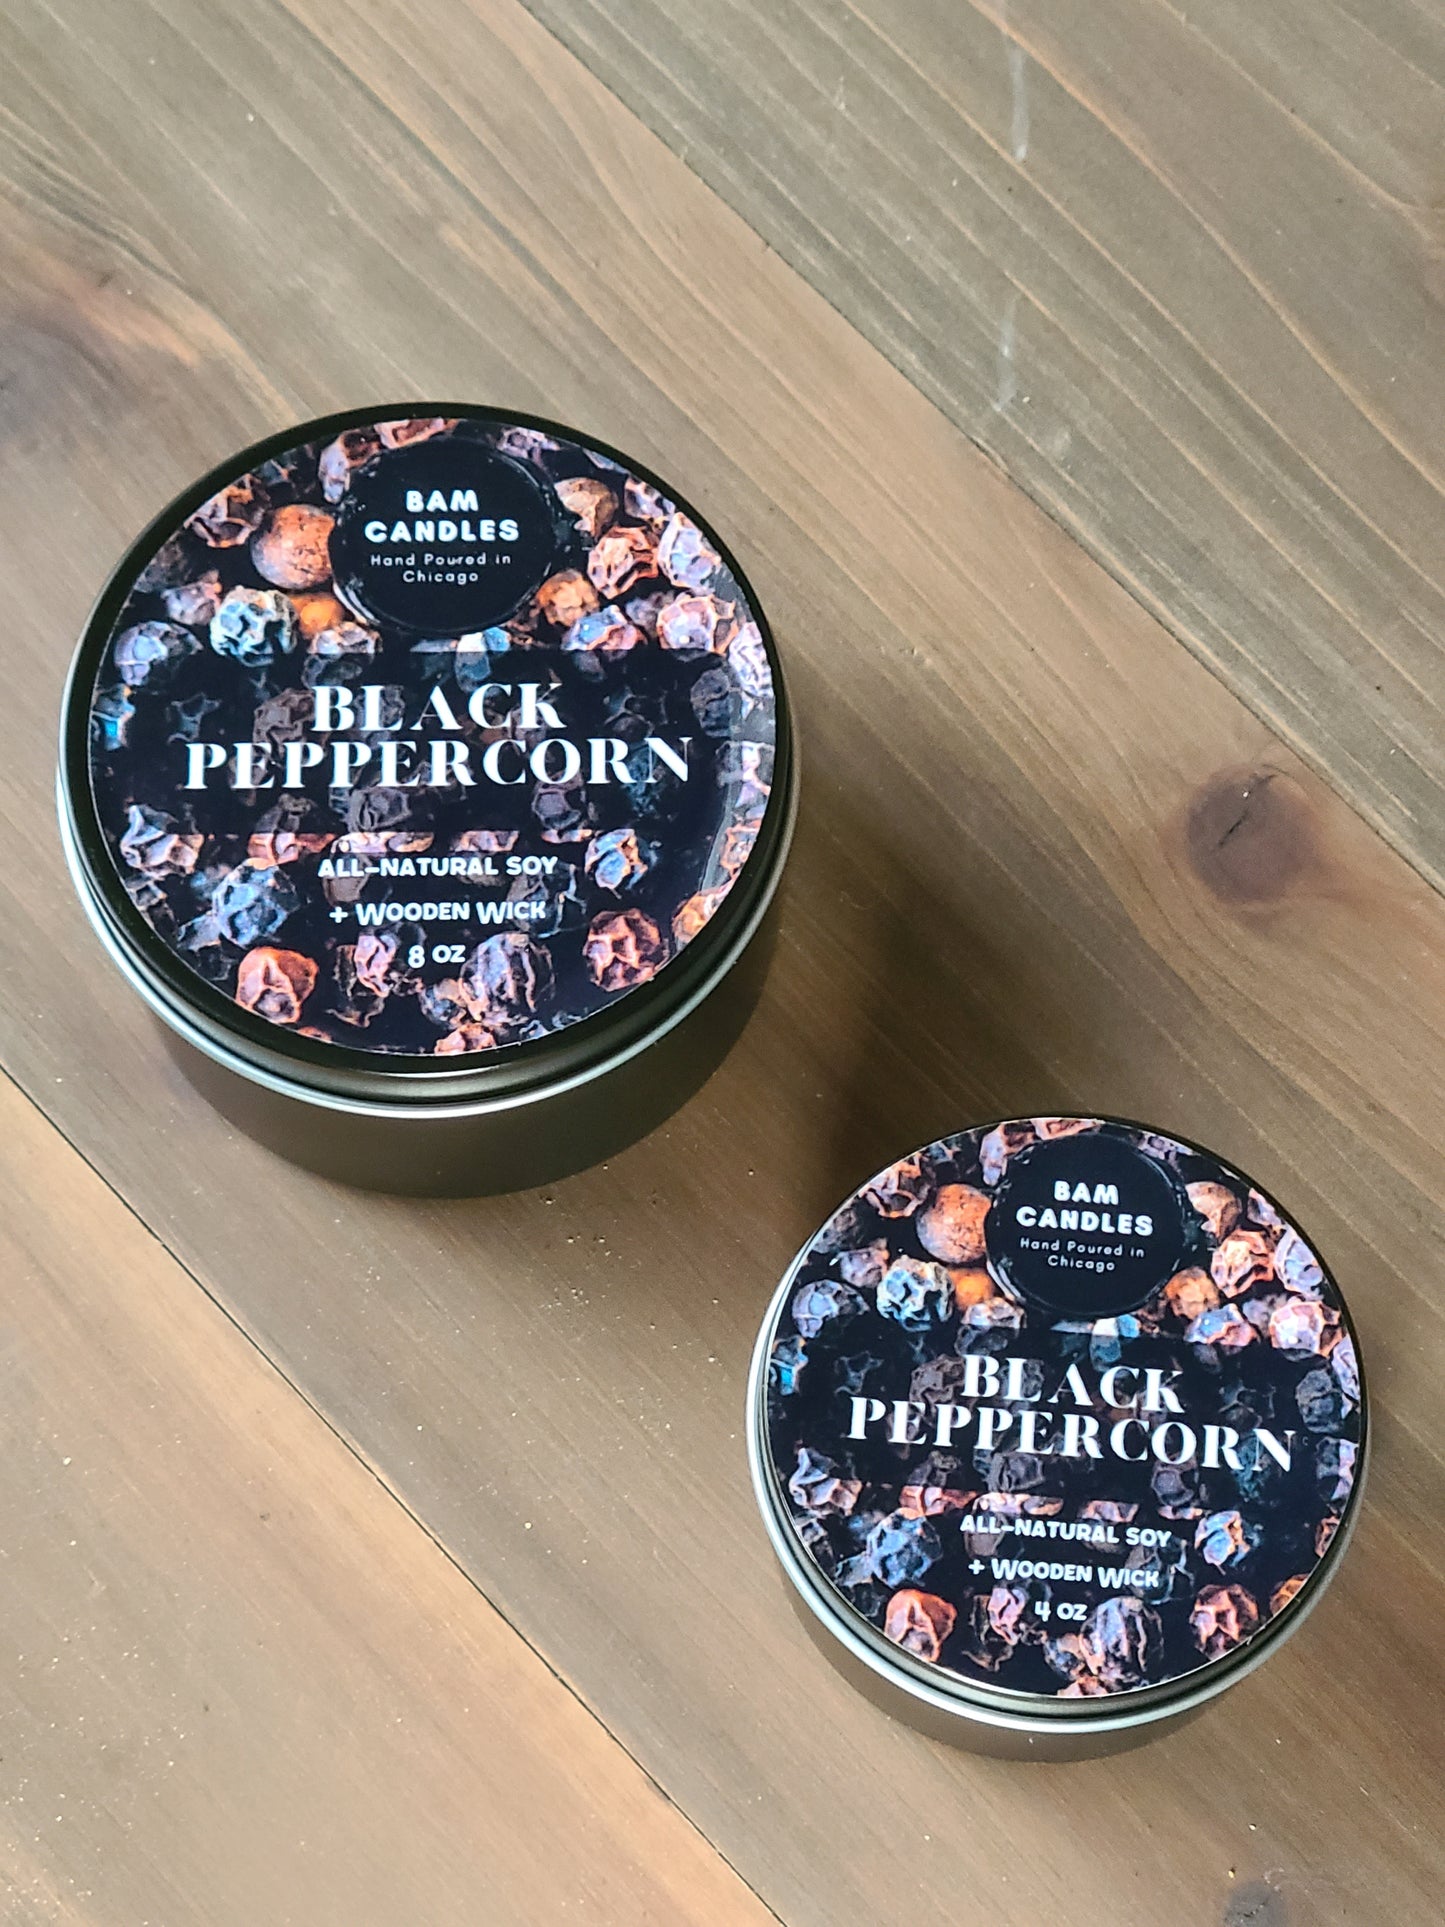 "BLACK PEPPERCORN" *BAM* SOY CANDLE